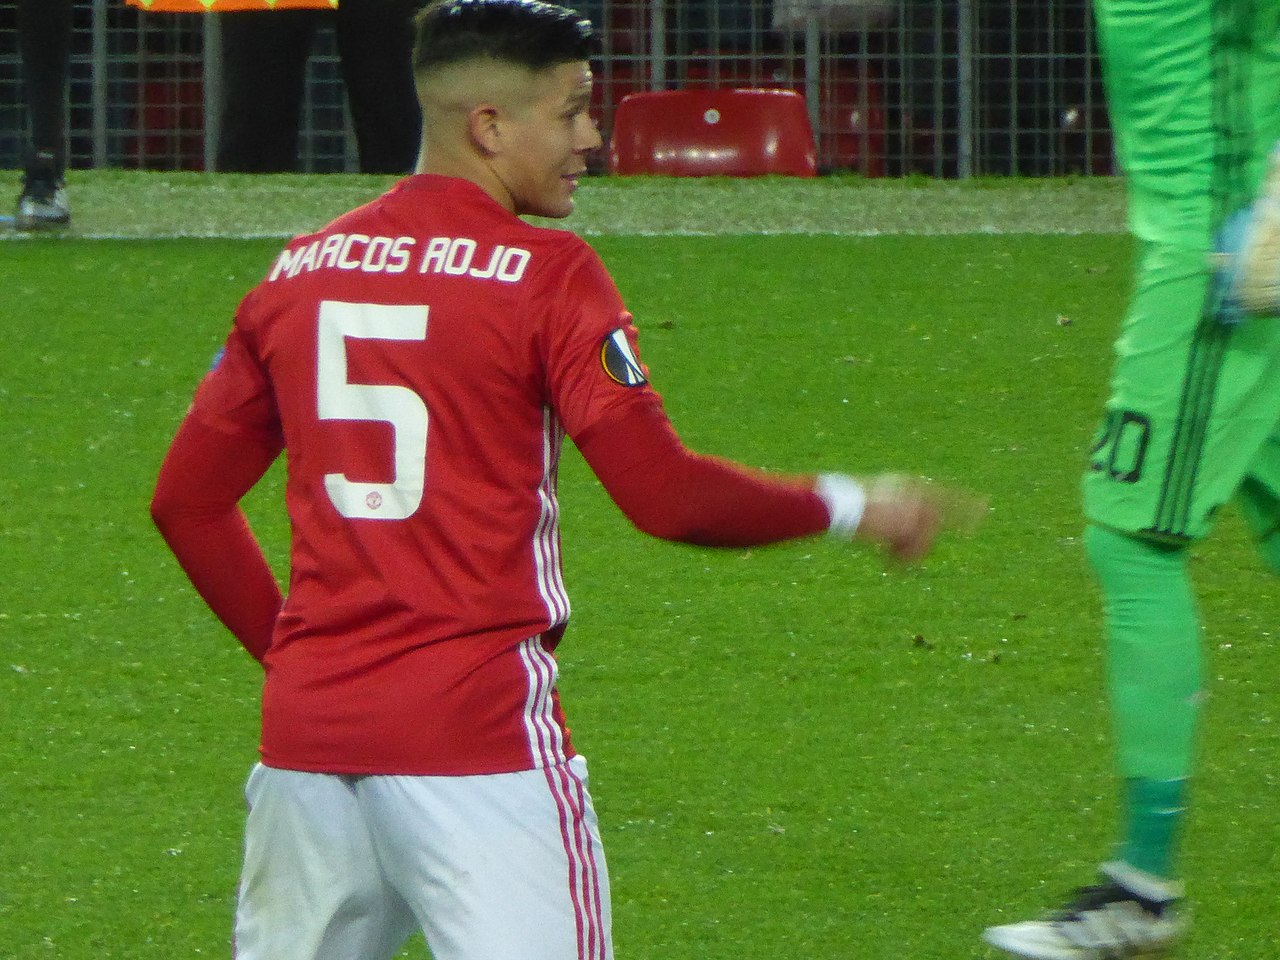 marcos rojo jersey number